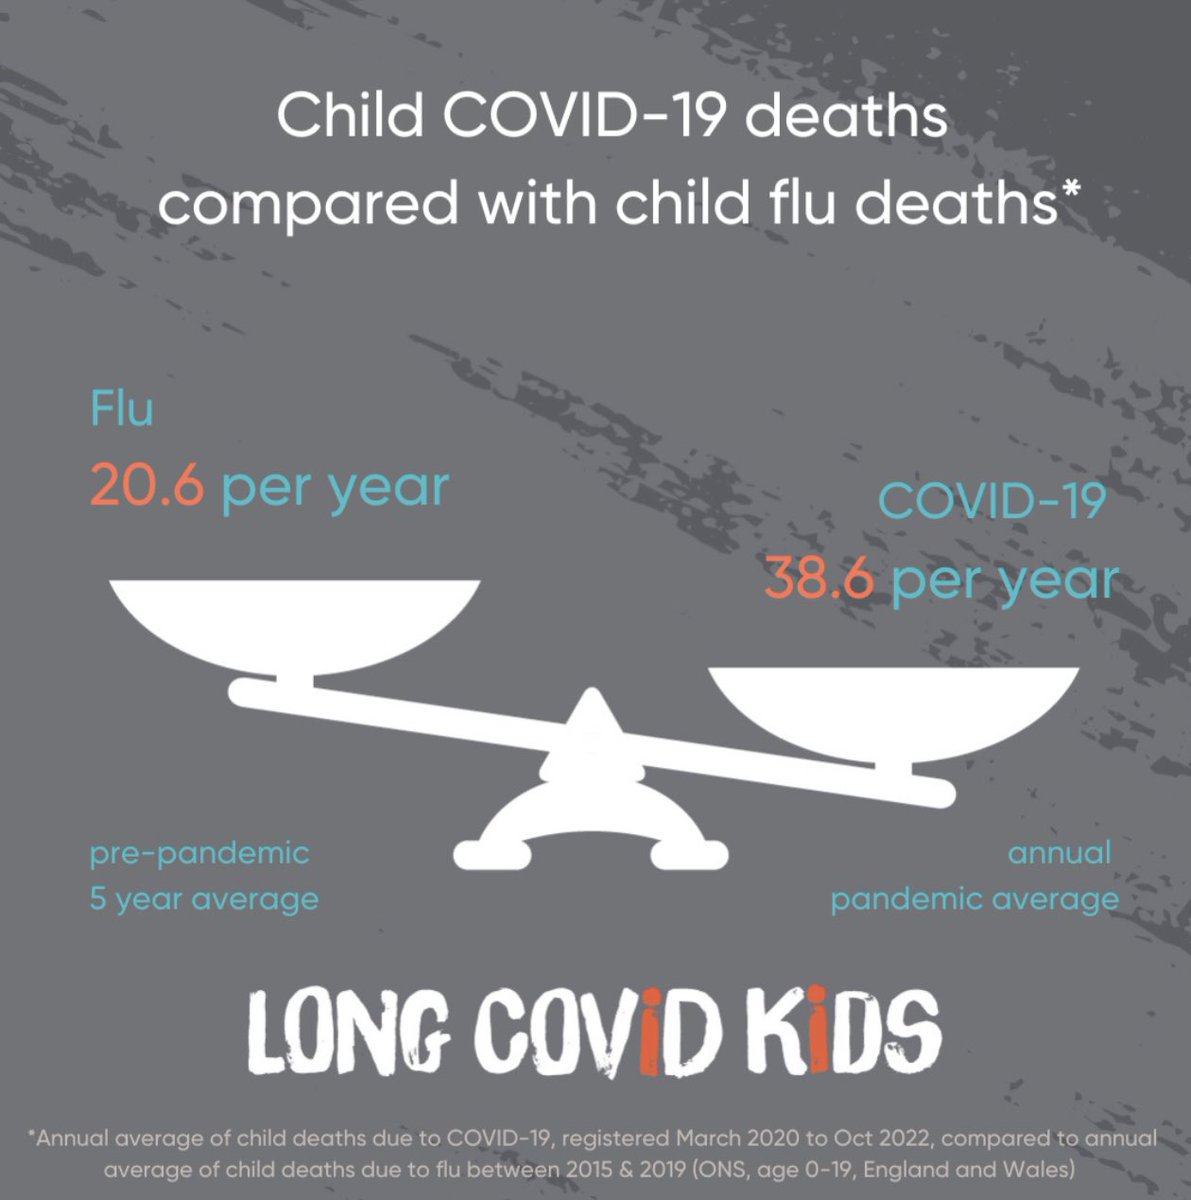 @coyl2022 Also incredible are how many children are being deregistered to safeguard health #Strep #ScarletFever #LongCovidKids 

#COVIDisAirborne #PostViral /infectious disease are not new phenomenon

Infecting children repeatedly is not the answer 

#CleanTheirAir #EllasLaw ht @jneill